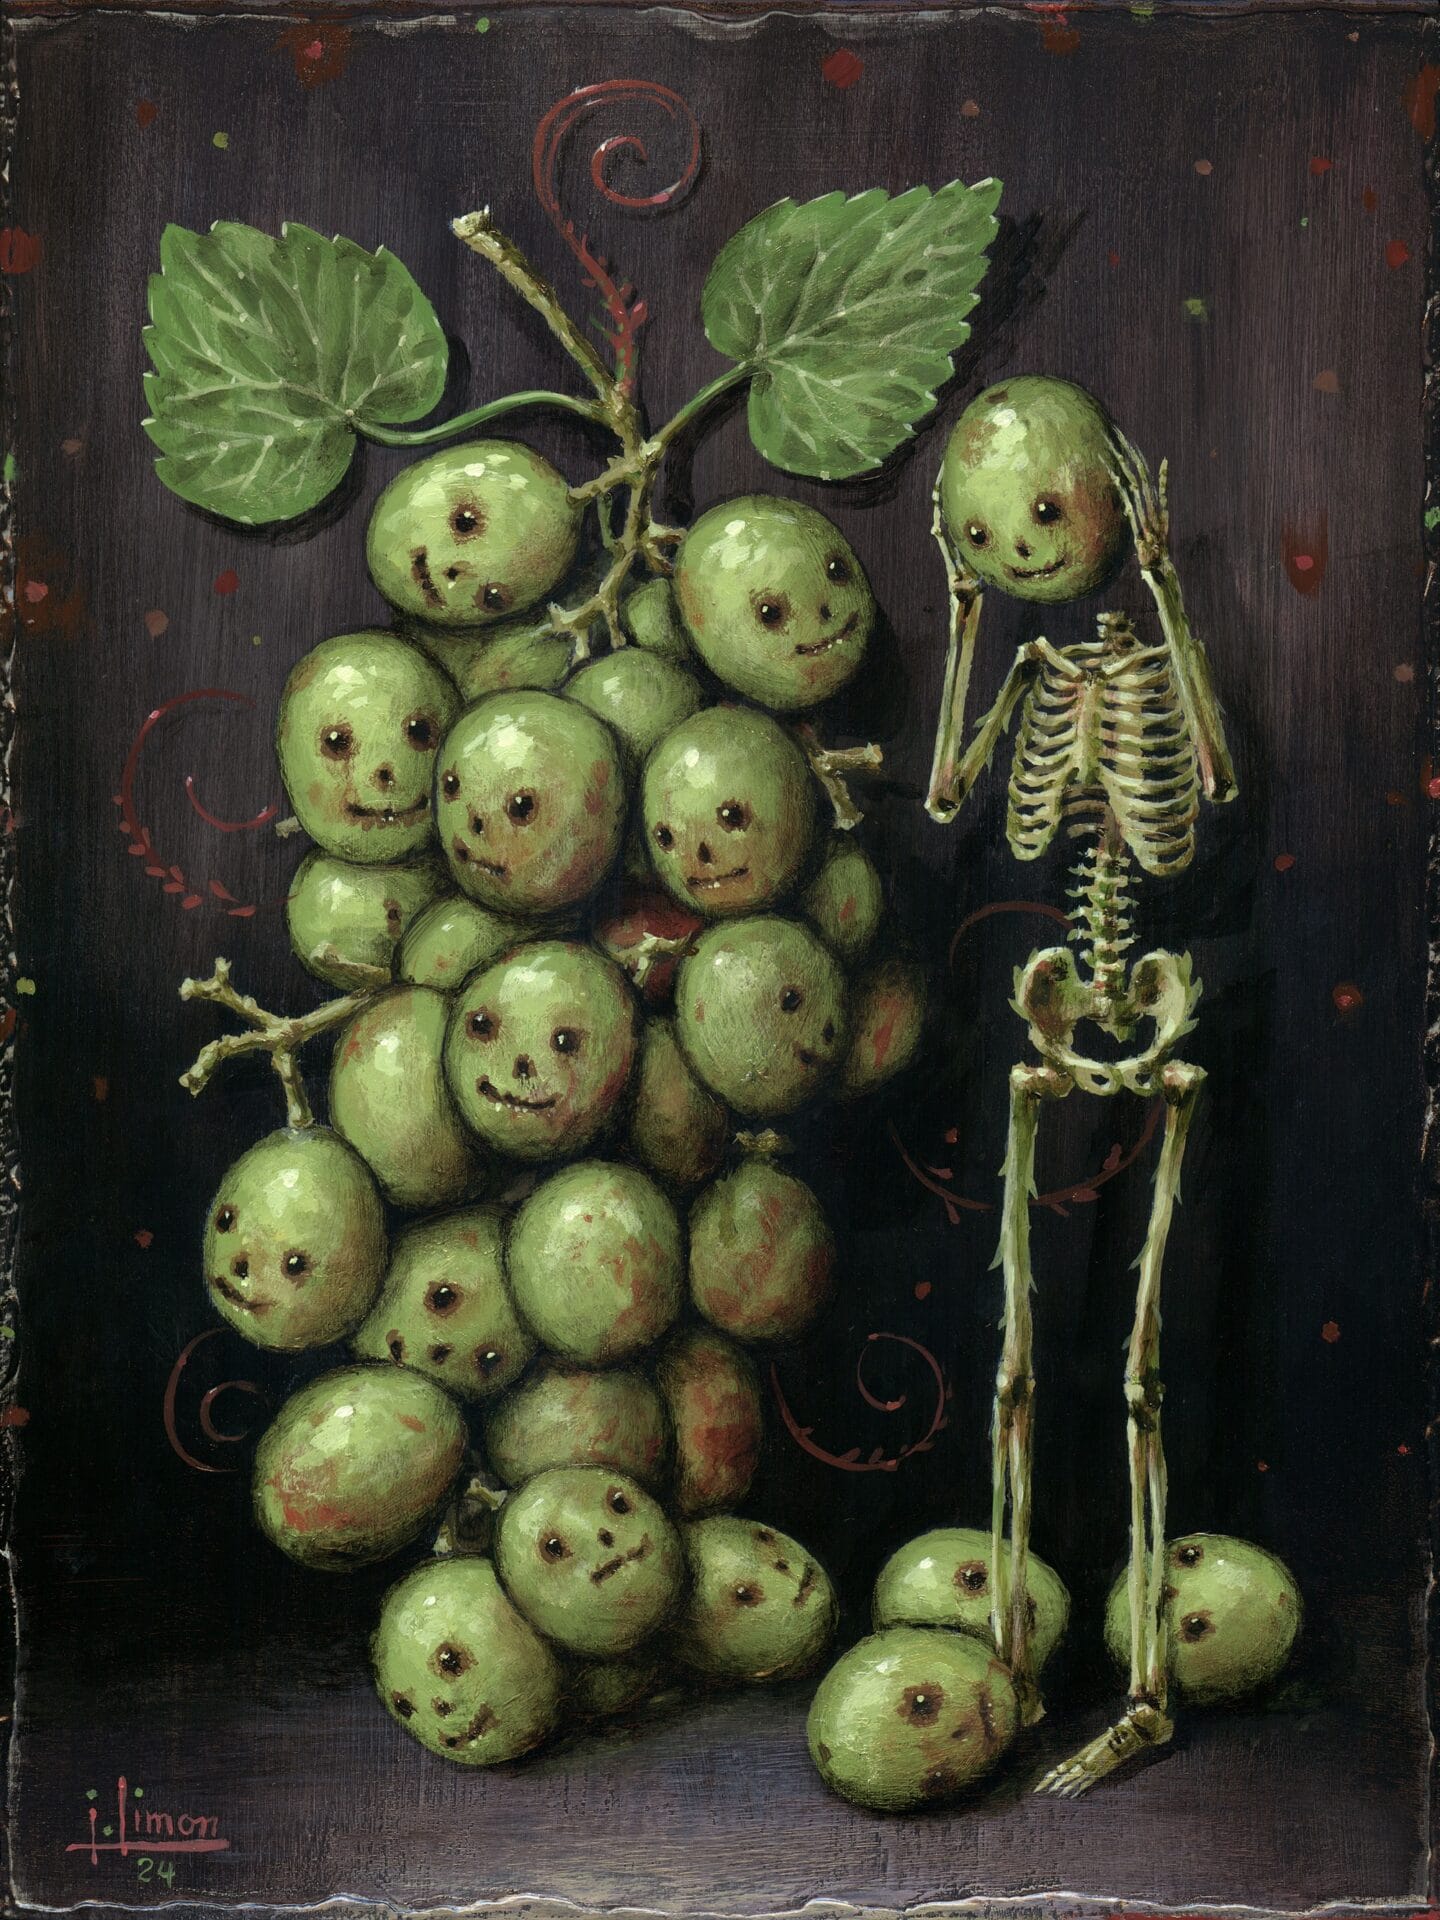 a green skeleton picks up a grape from a bunch and fits it on its neck. all the grapes have faces